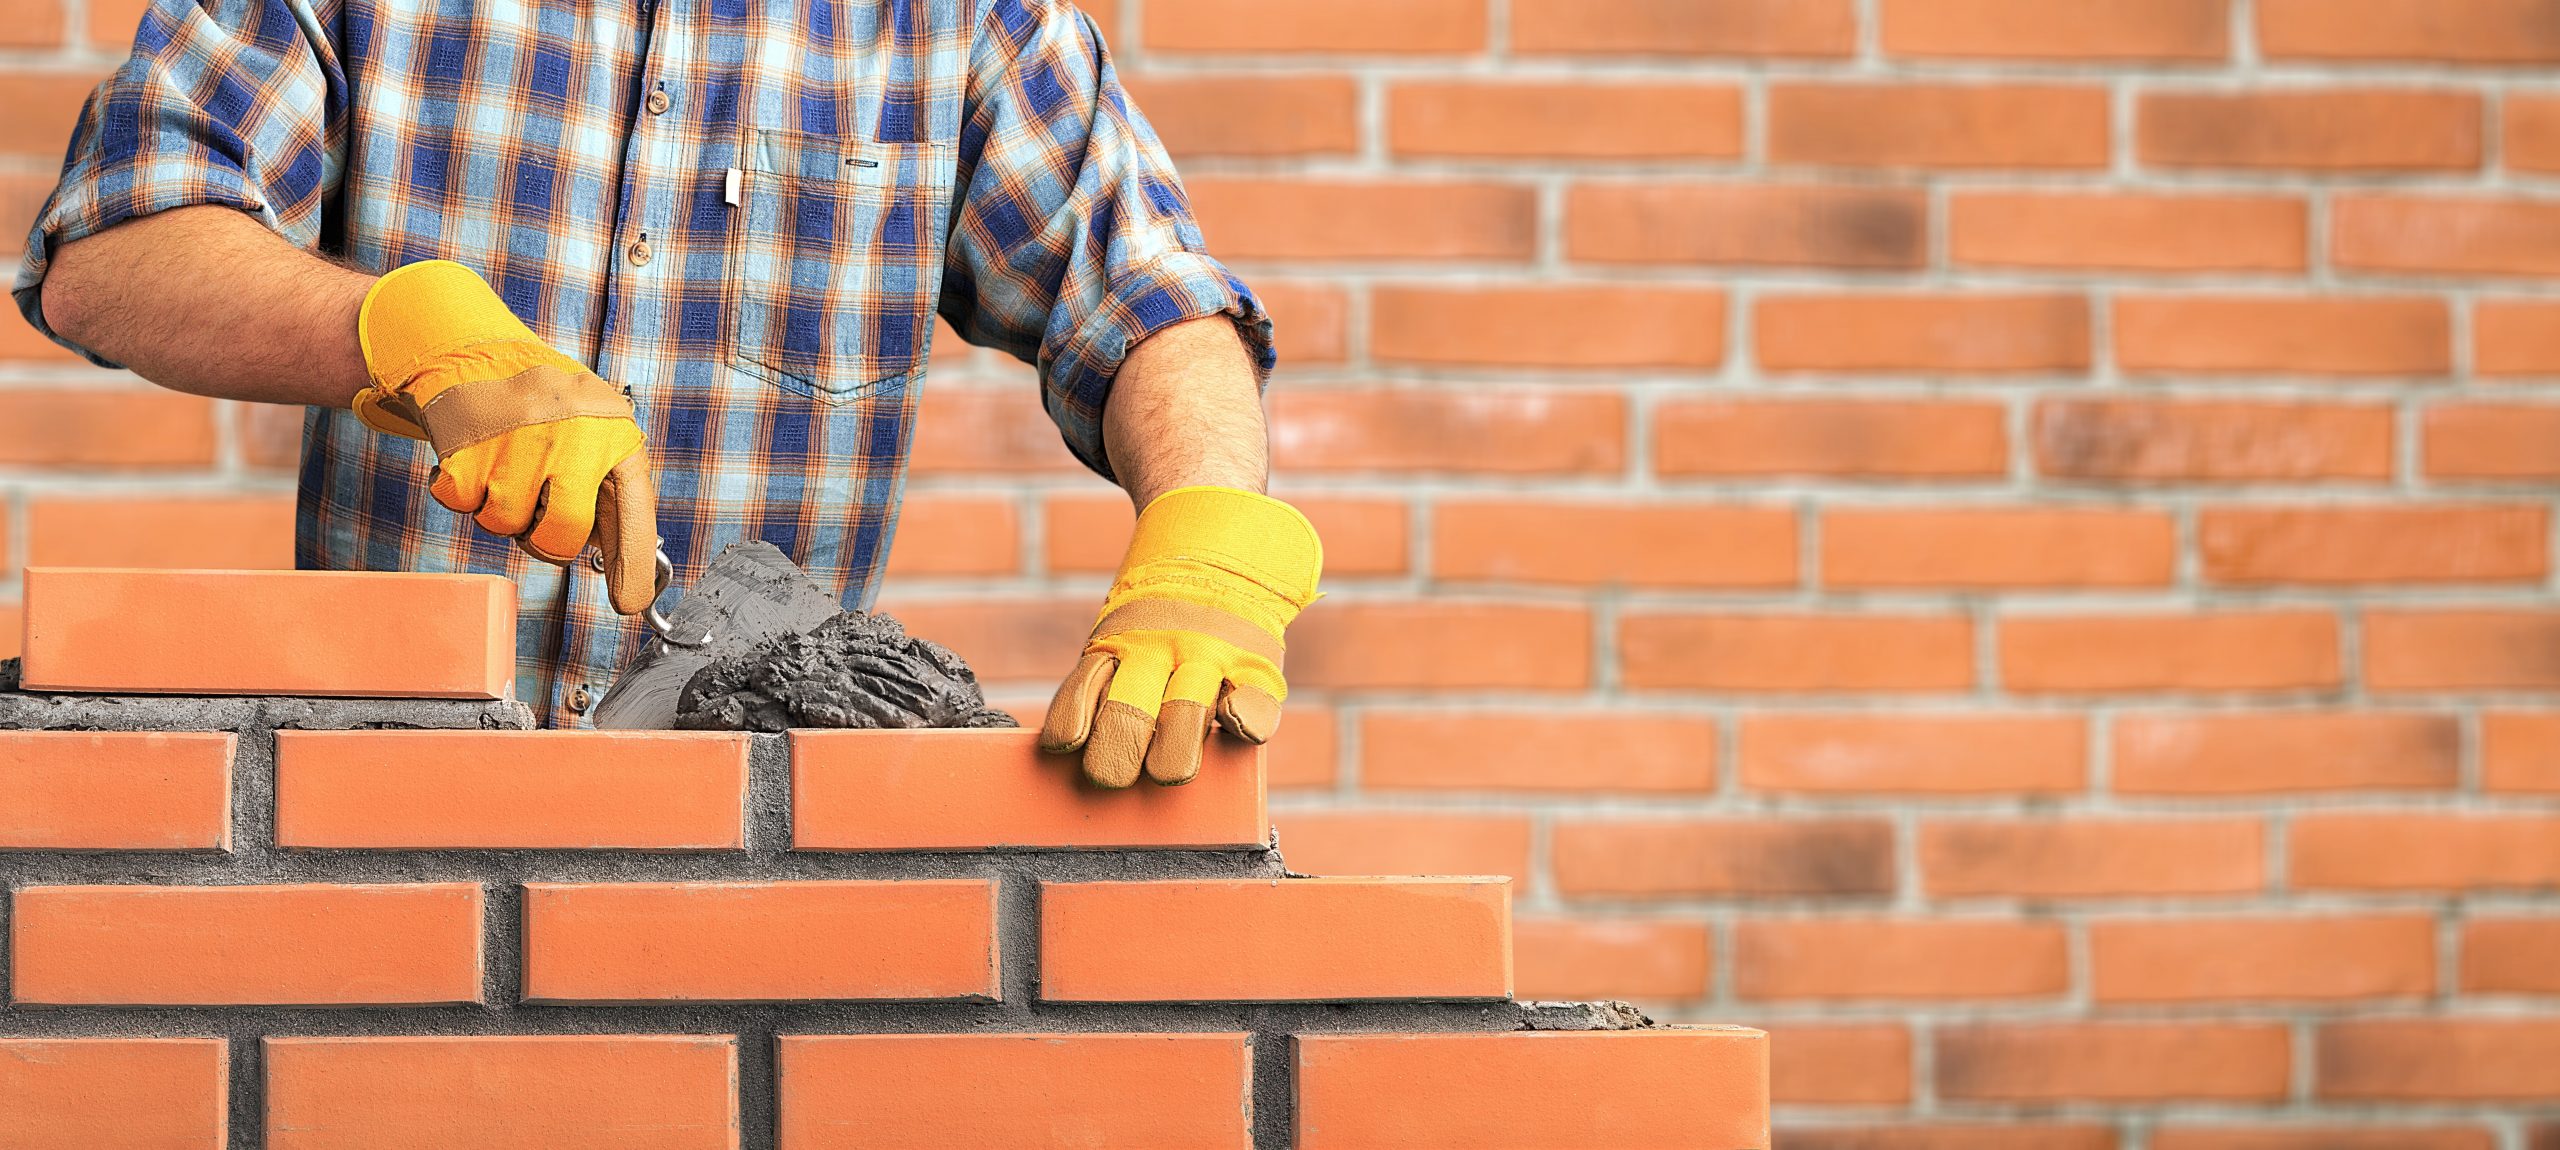 TIPS FOR CHOOSING A GOOD MASONRY CONTRACTOR